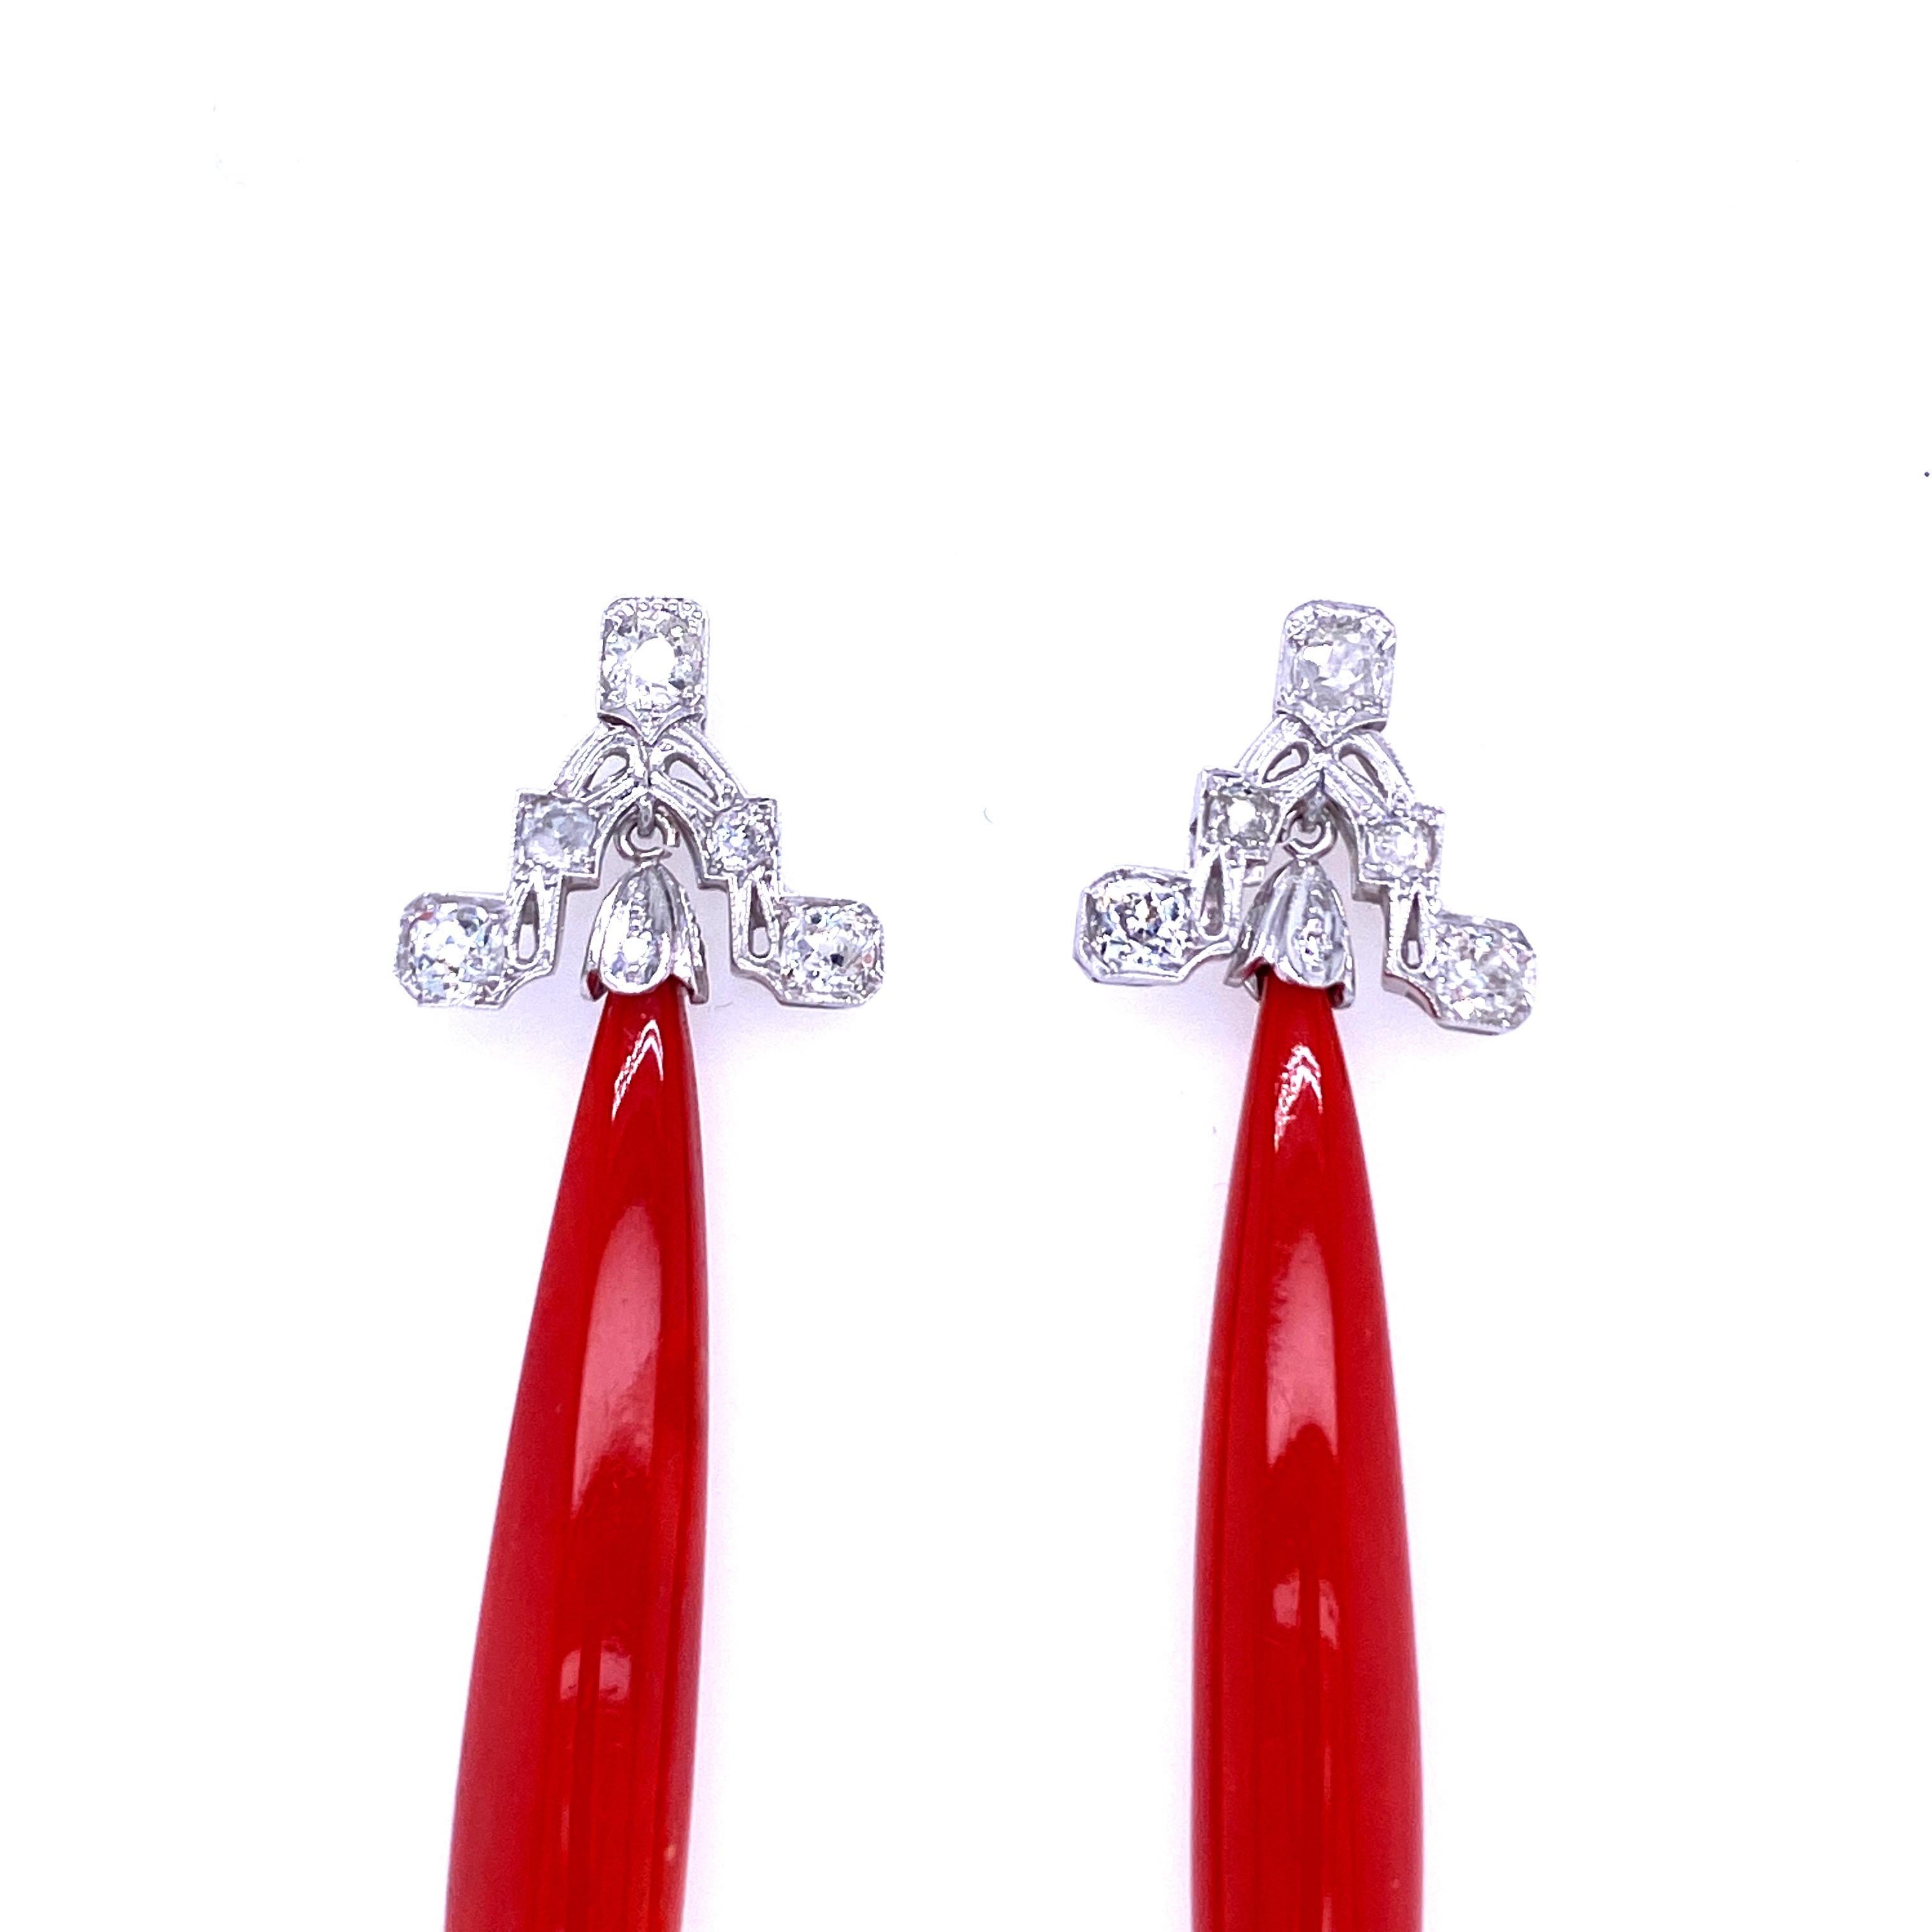 Art Deco Sardinian Coral Diamond Gold Drop Earrings In Excellent Condition For Sale In Napoli, Italy